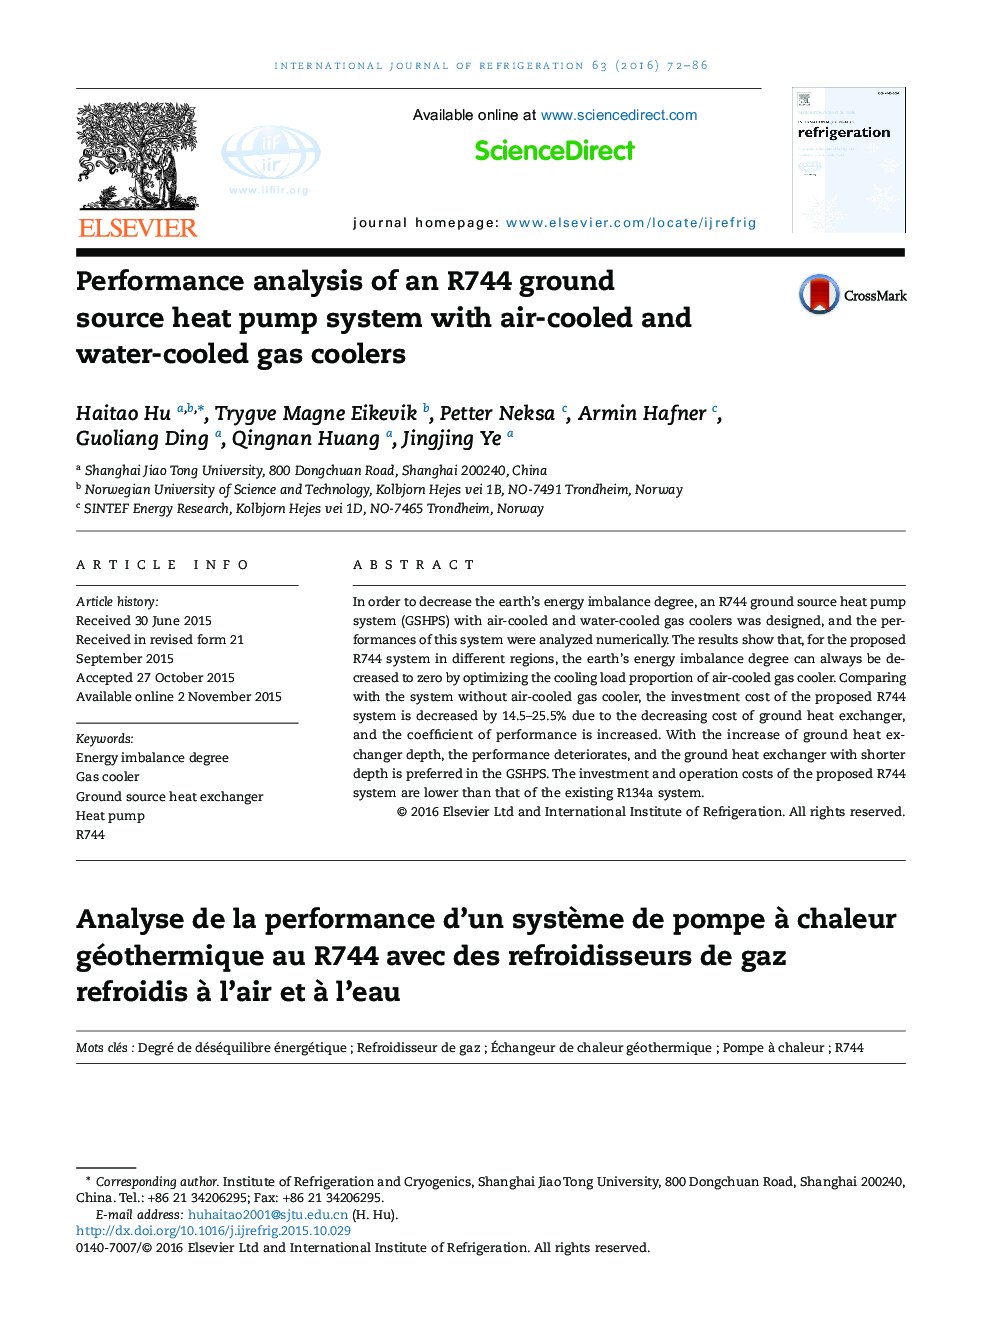 Performance analysis of an R744 ground source heat pump system with air-cooled and water-cooled gas coolers